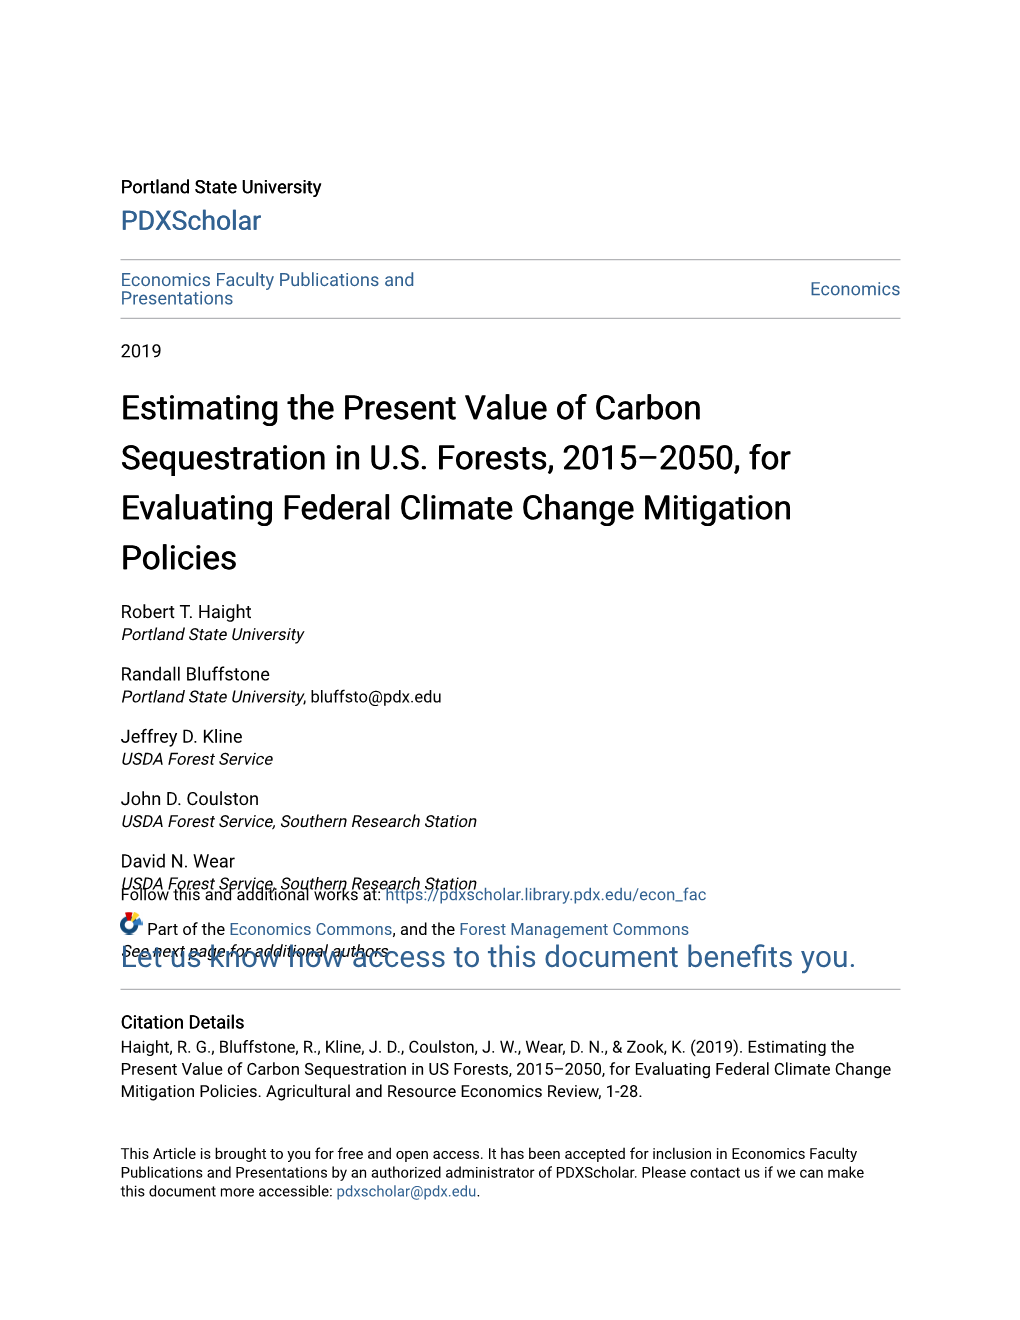 Estimating the Present Value of Carbon Sequestration in U.S. Forests, 2015–2050, for Evaluating Federal Climate Change Mitigation Policies